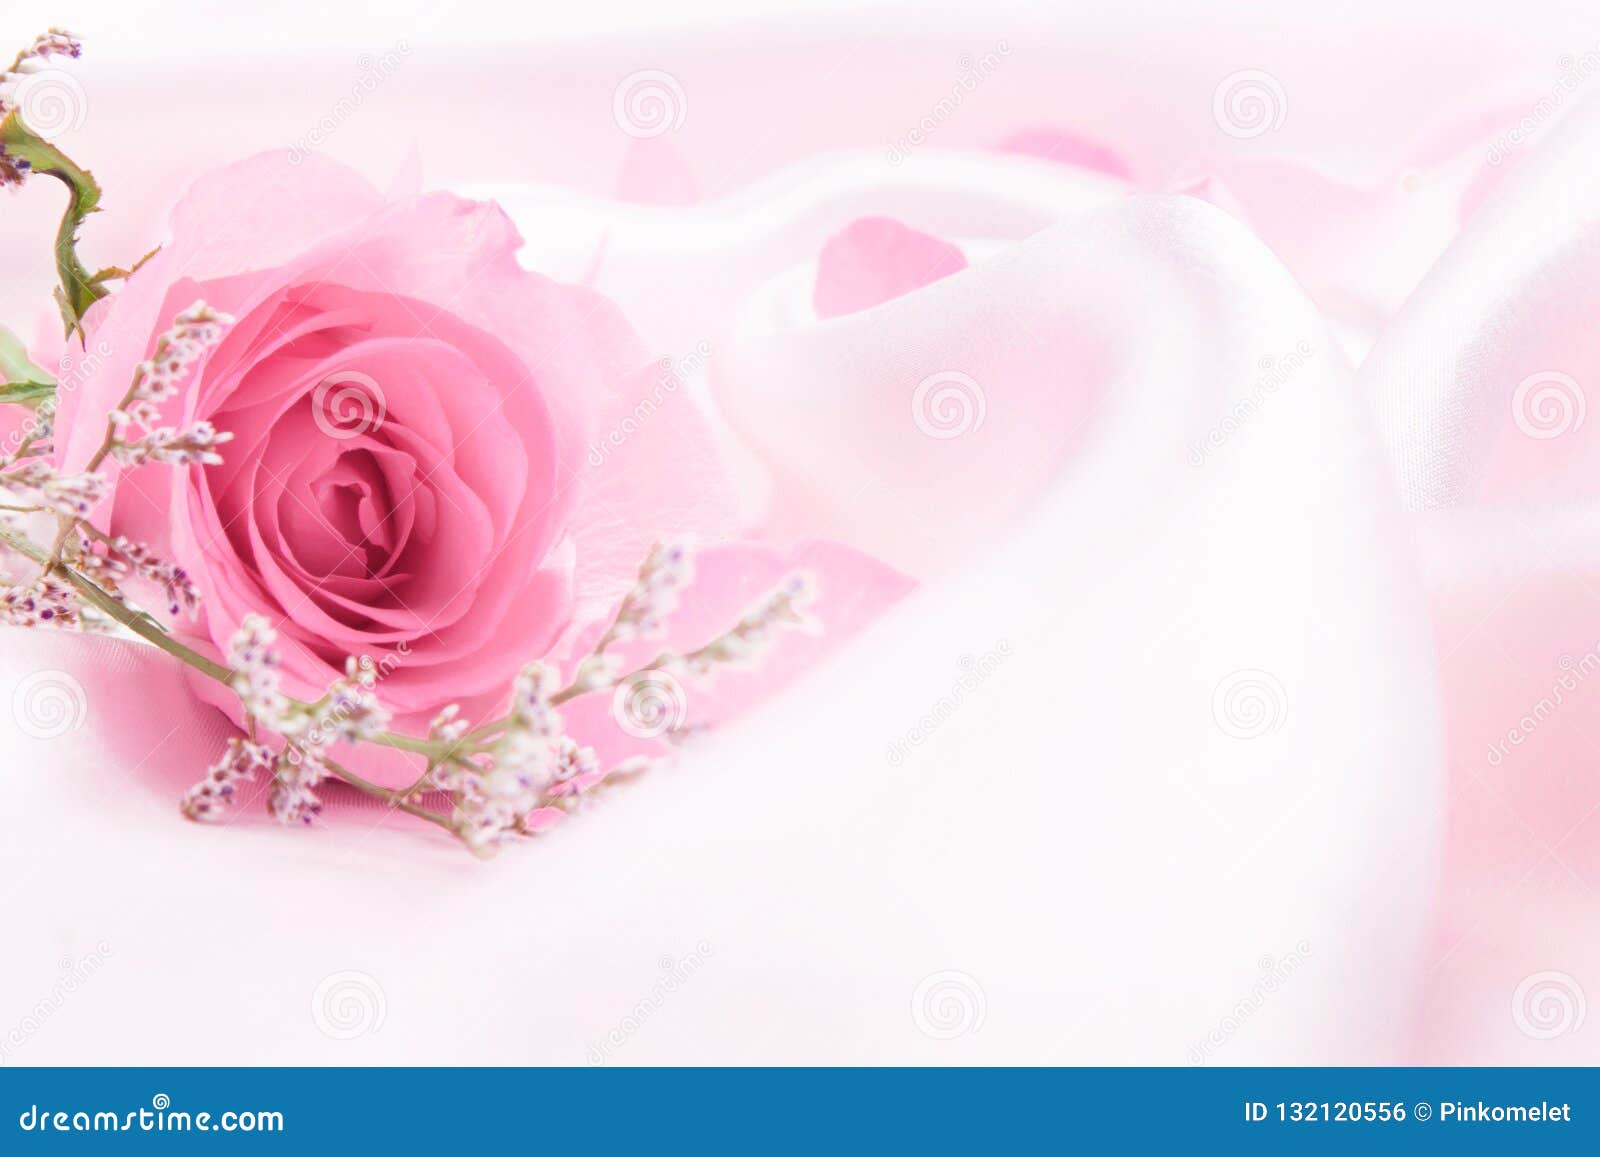 Soft Sweet Rose Flowers for the Love Romance Background Stock ...